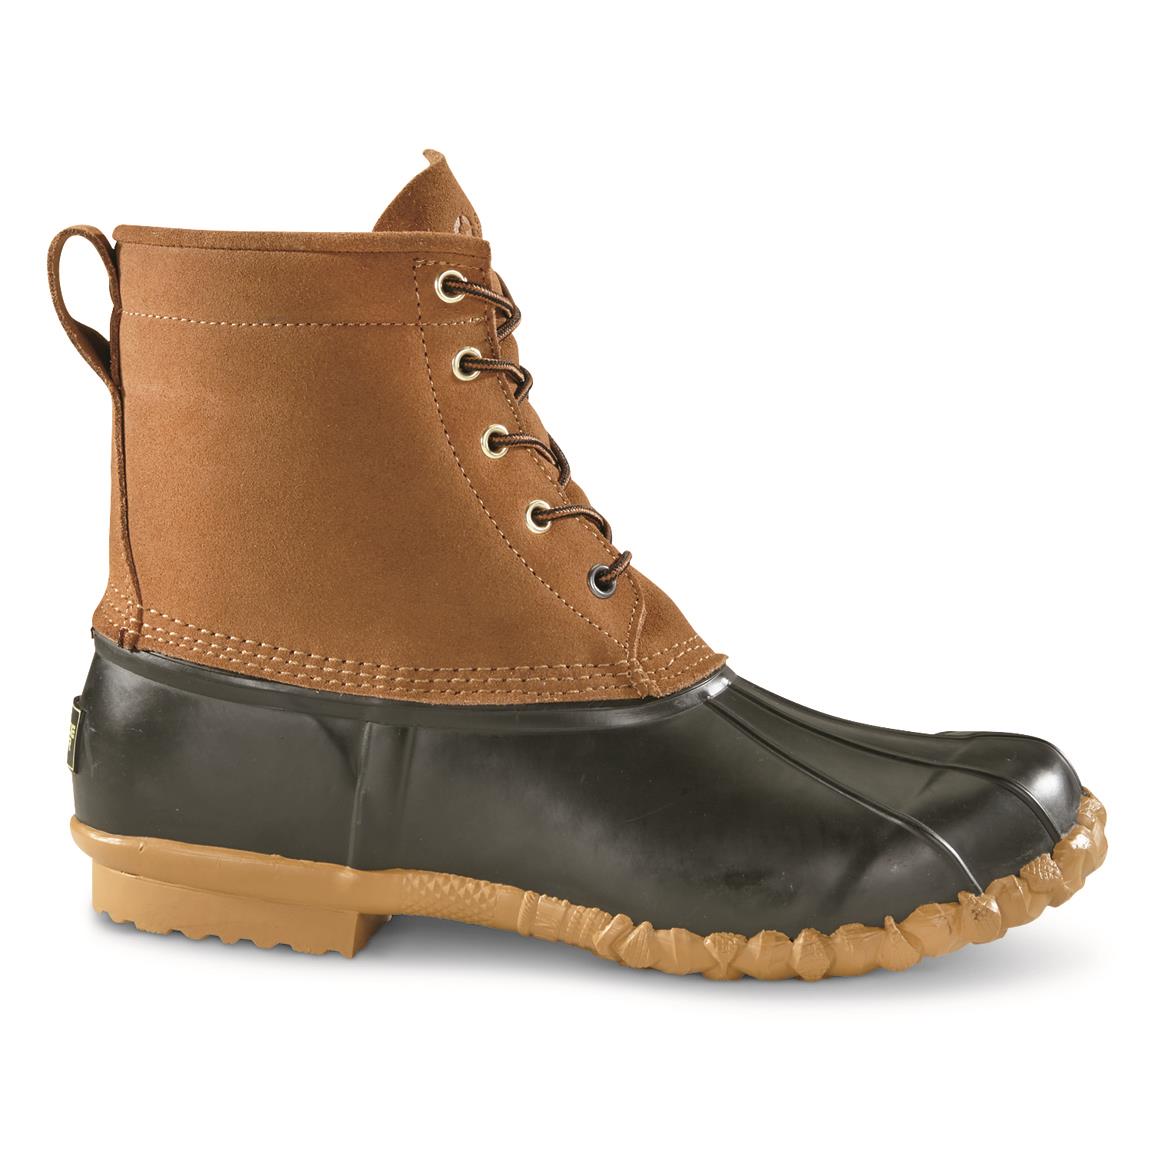 Guide Gear Lace-Up Insulated Duck Boots 